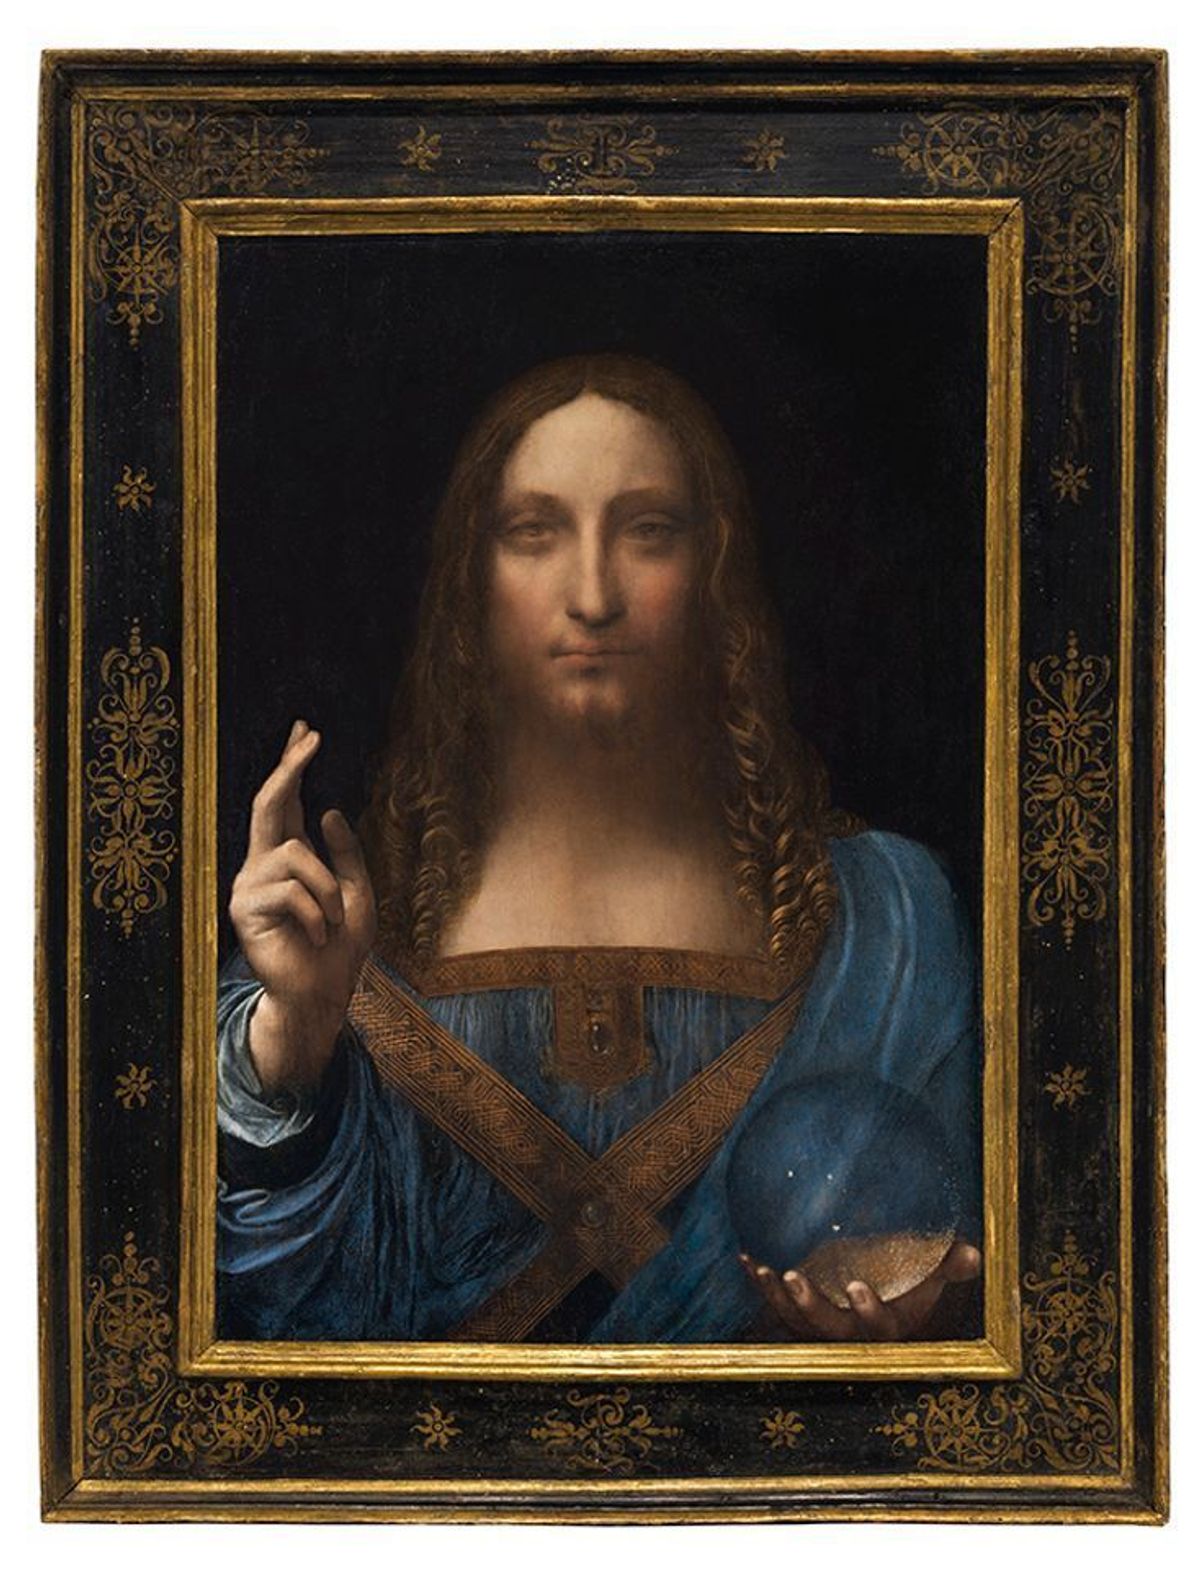 Specialists were divided over the attribution of Salvator Mundi, a new book reveals Courtesy of Christie's Images LTD 2017